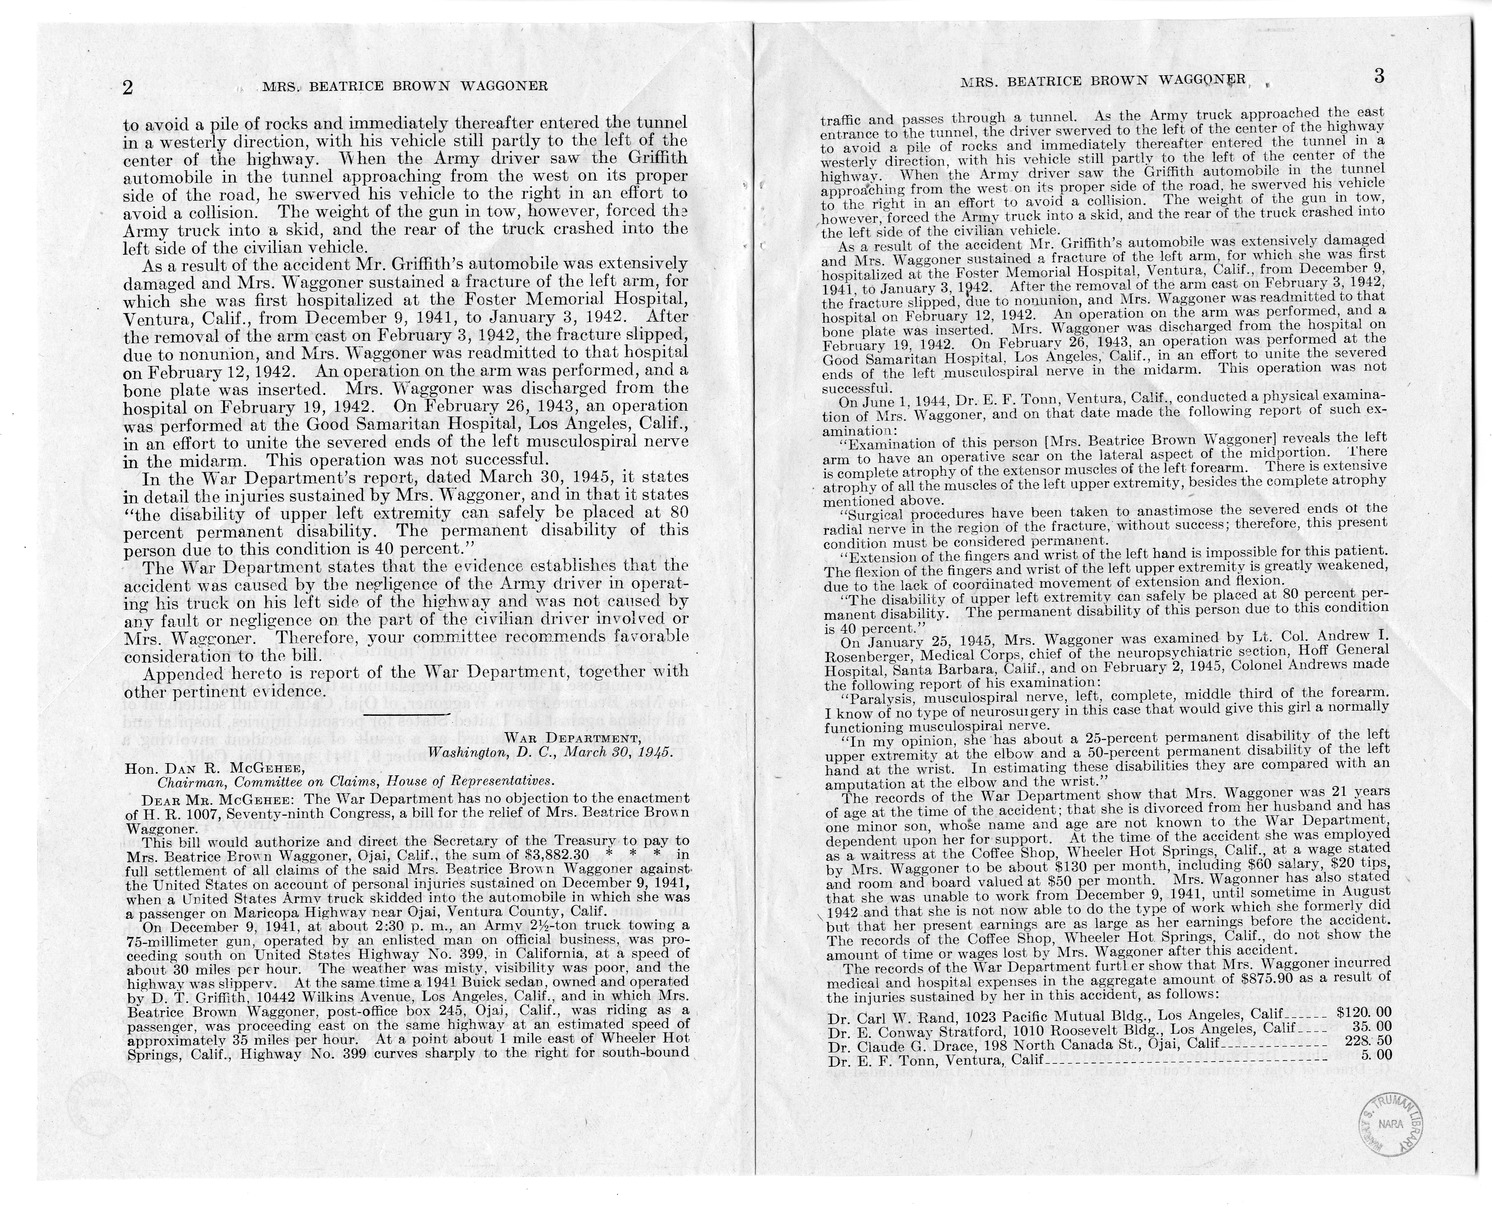 Memorandum from Frederick Bailey to M. C. Latta, H.R. 1007, For the Relief of Mrs. Beatrice Brown Waggoner, with Attachments